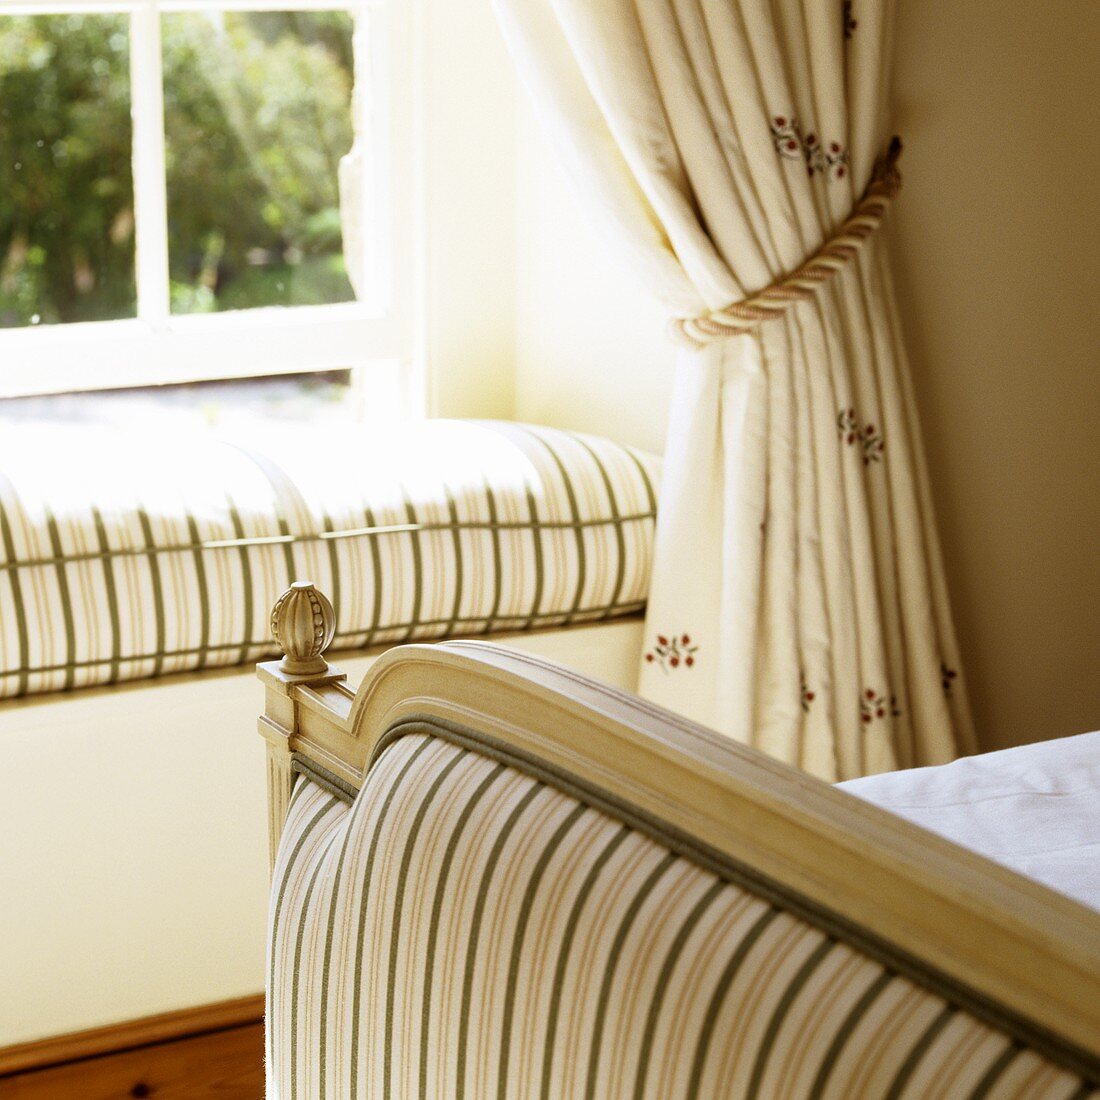 A window sill with a cushion in the bedroom of a country house